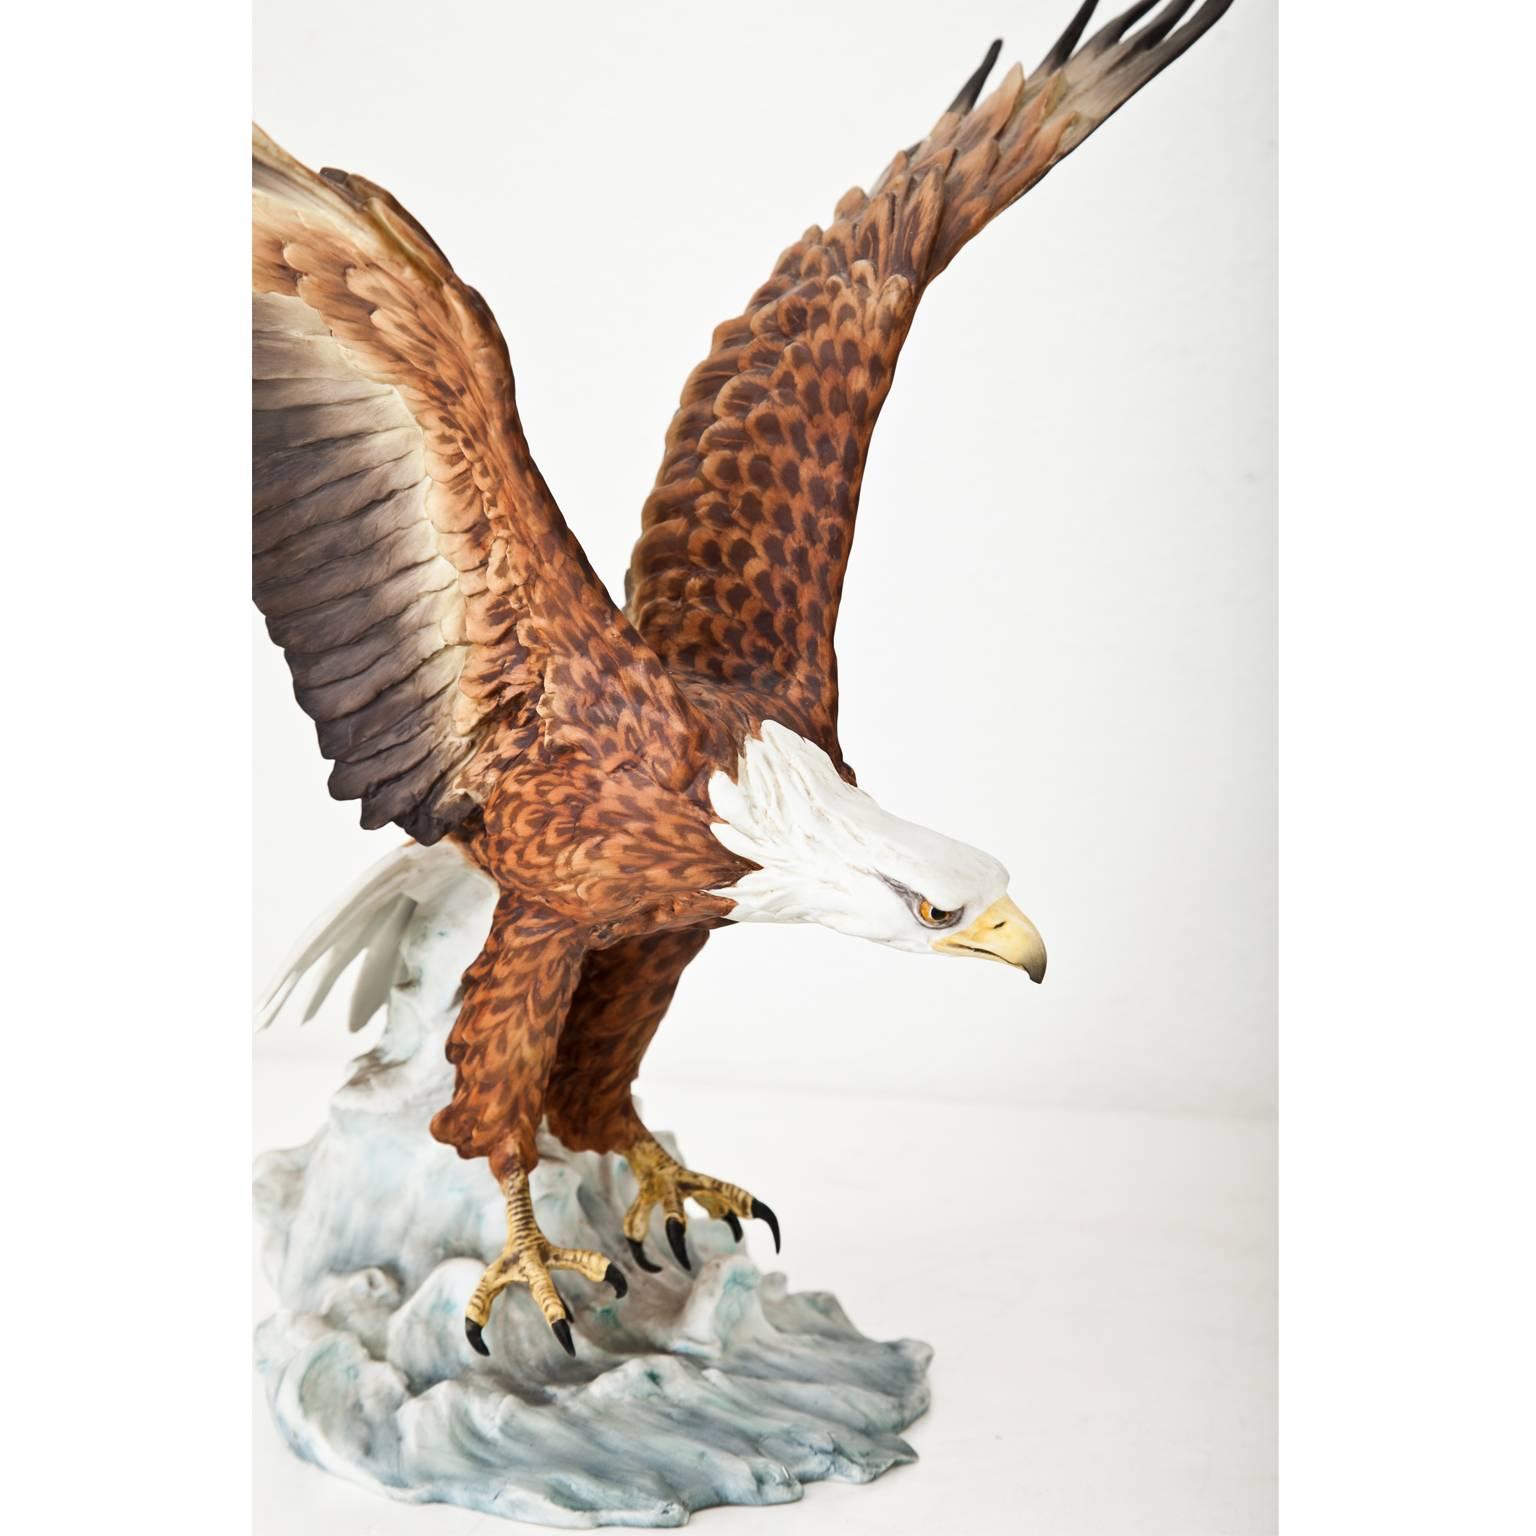 Bald eagle 'Haliaeetus leucocephalus" porcelain sculpture by Giuseppe Tagliariol, limited to 15000 pieces and hand-painted. This is sculpture no. 328 of the "Kaiser Sculpture of Wildlife" series.
Signed at numbered at the bottom.